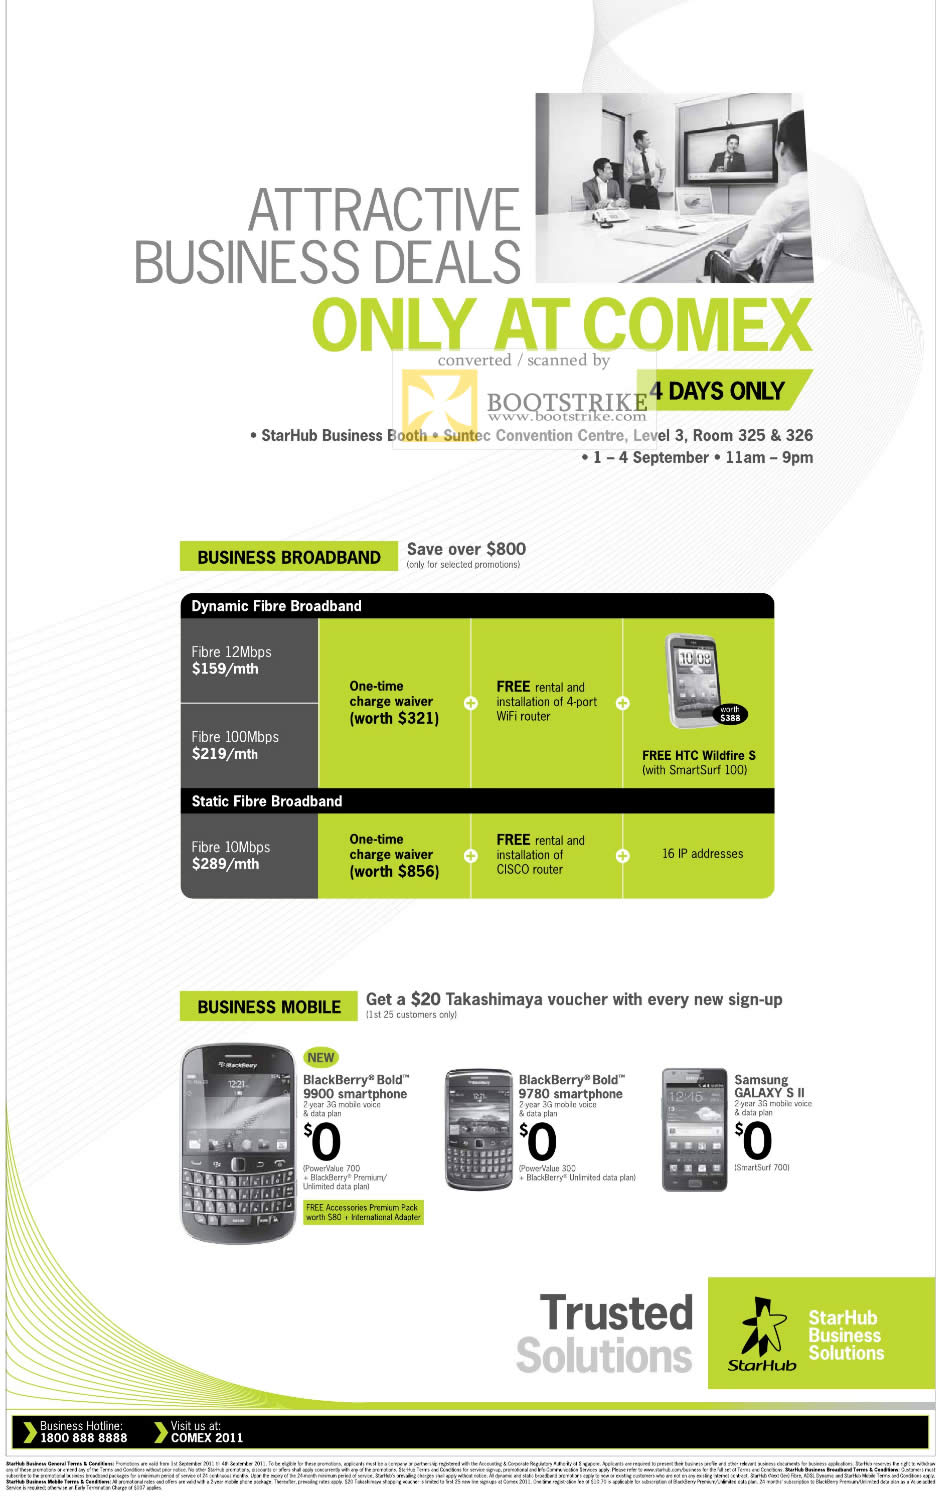 COMEX 2011 price list image brochure of Starhub Business Broadband Fibre 12Mbps 100Mbps Free HTC Wildfire S 10Mbps Blackberry Bold 9900 9780 Samsung Galaxy S II